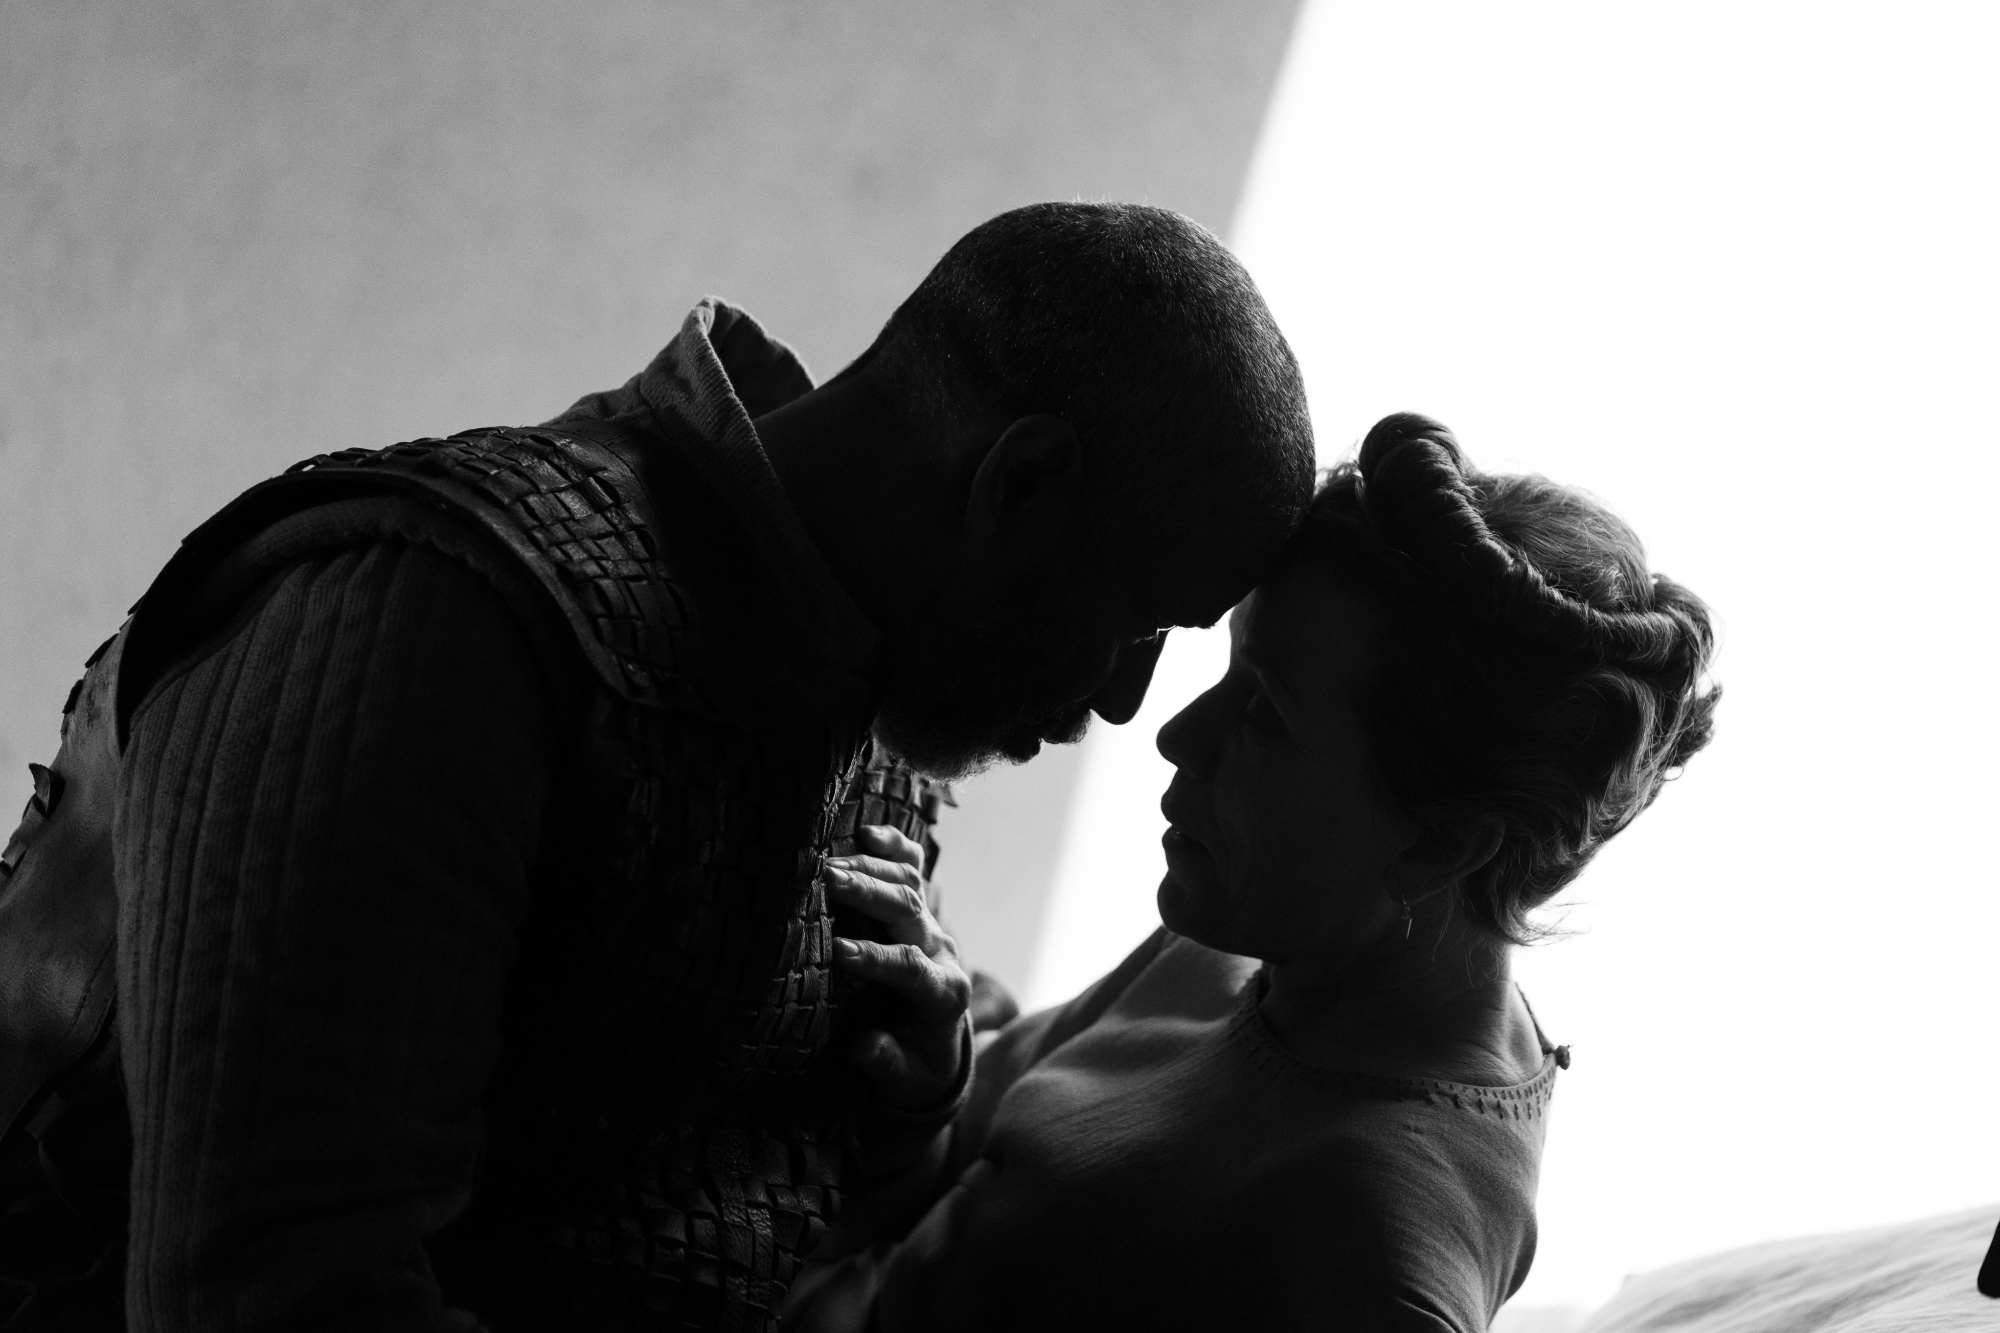 'The Tragedy of Macbeth' review Denzel Washington as Macbeth and Frances McDormand as Lady Macbeth touching their foreheads against each other's